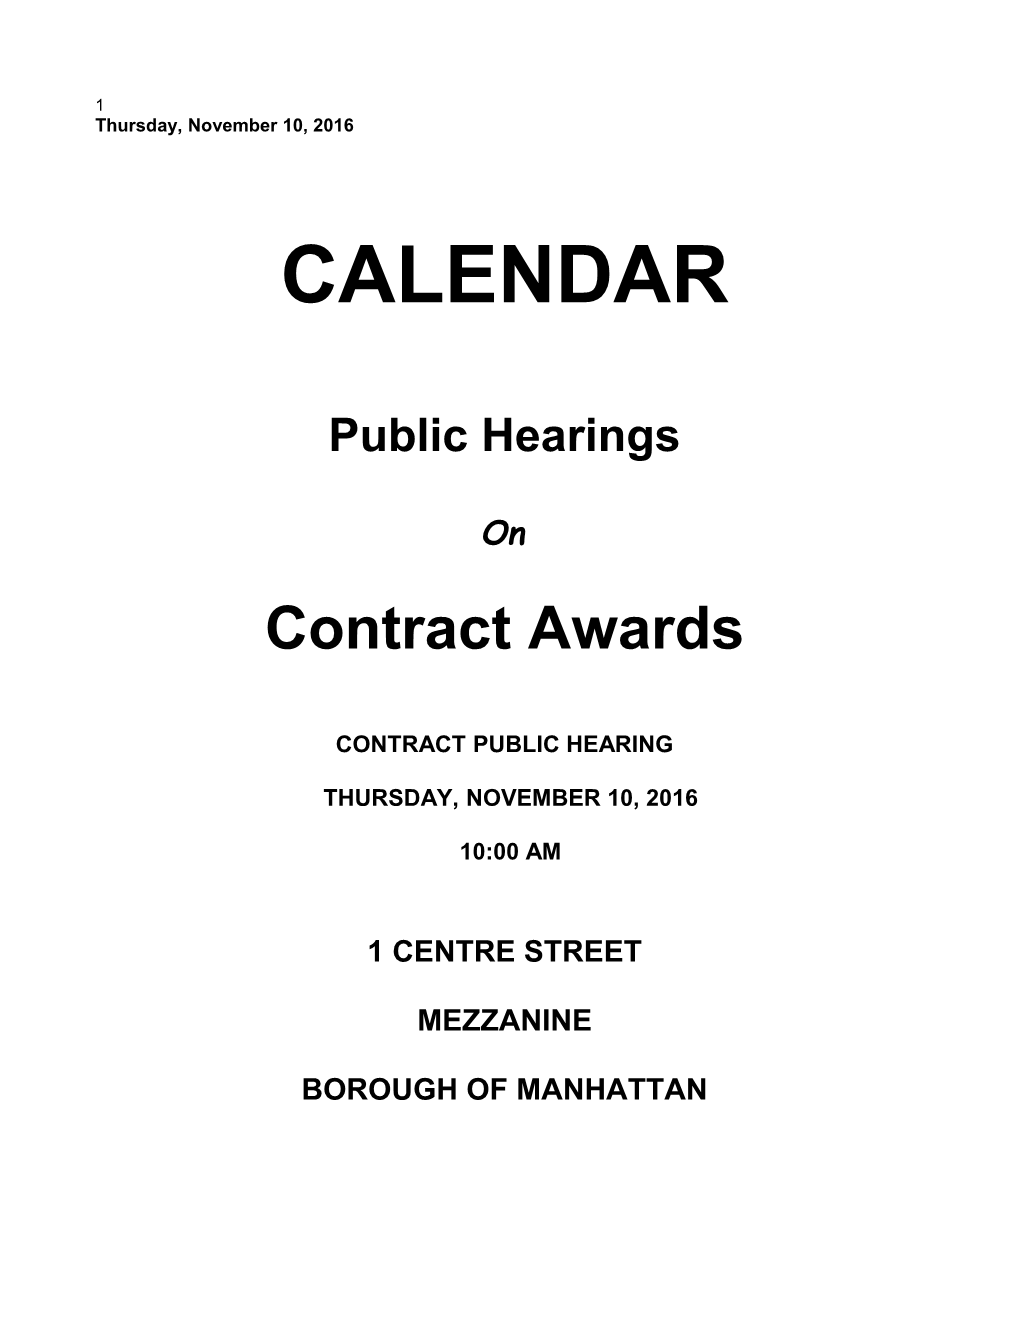 Contract Public Hearing